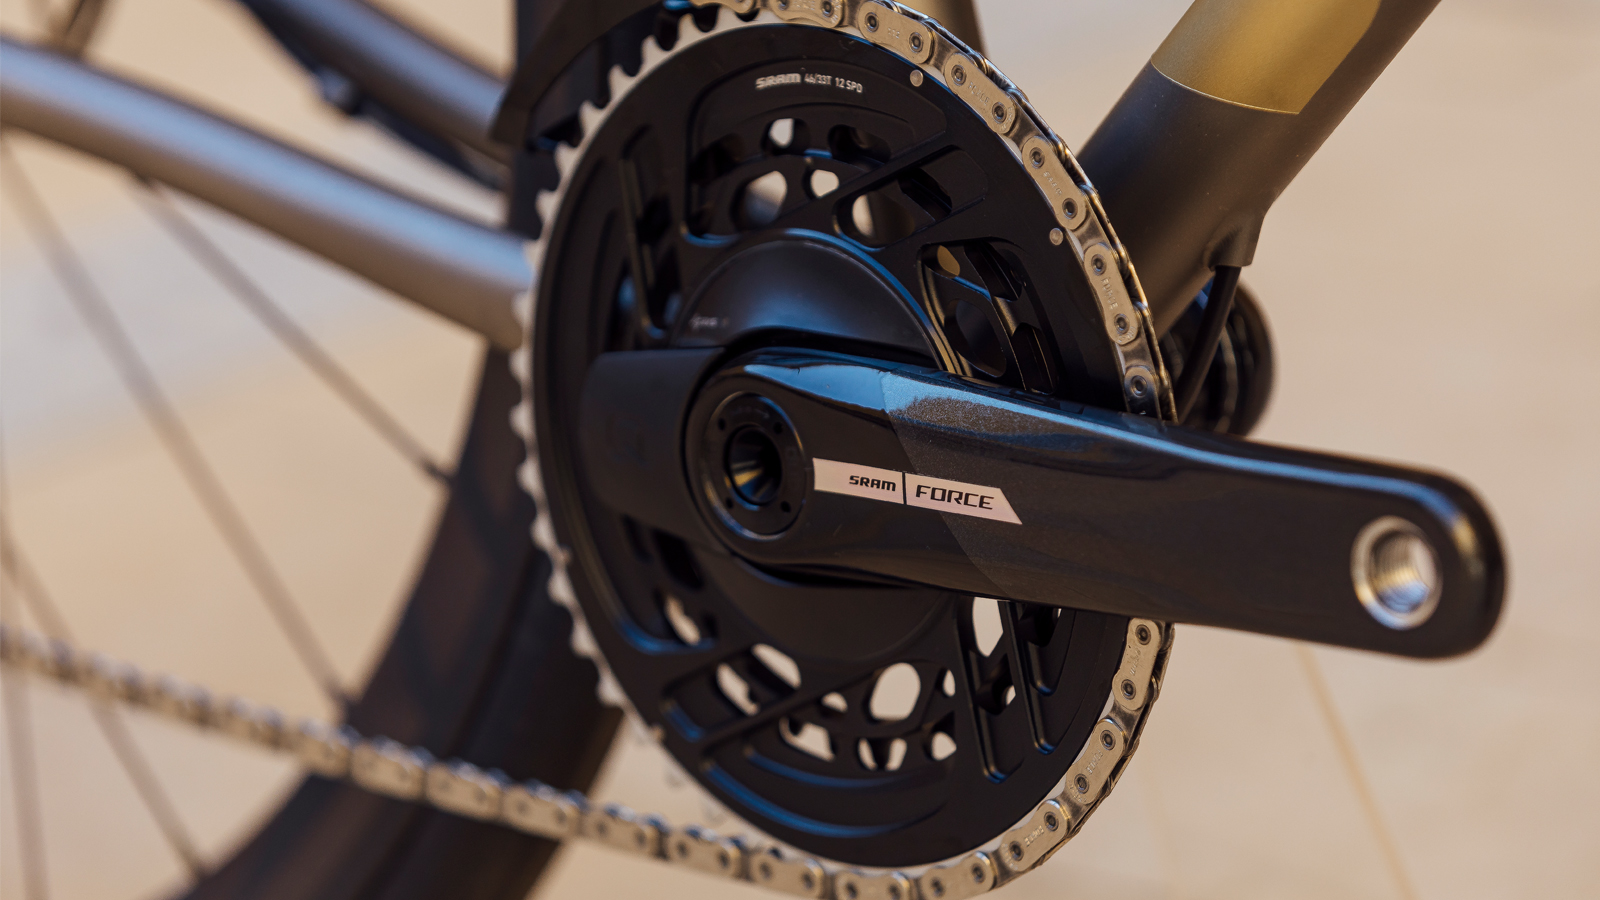 SRAM road groupsets: All of SRAM's 1x and 2x groupset options